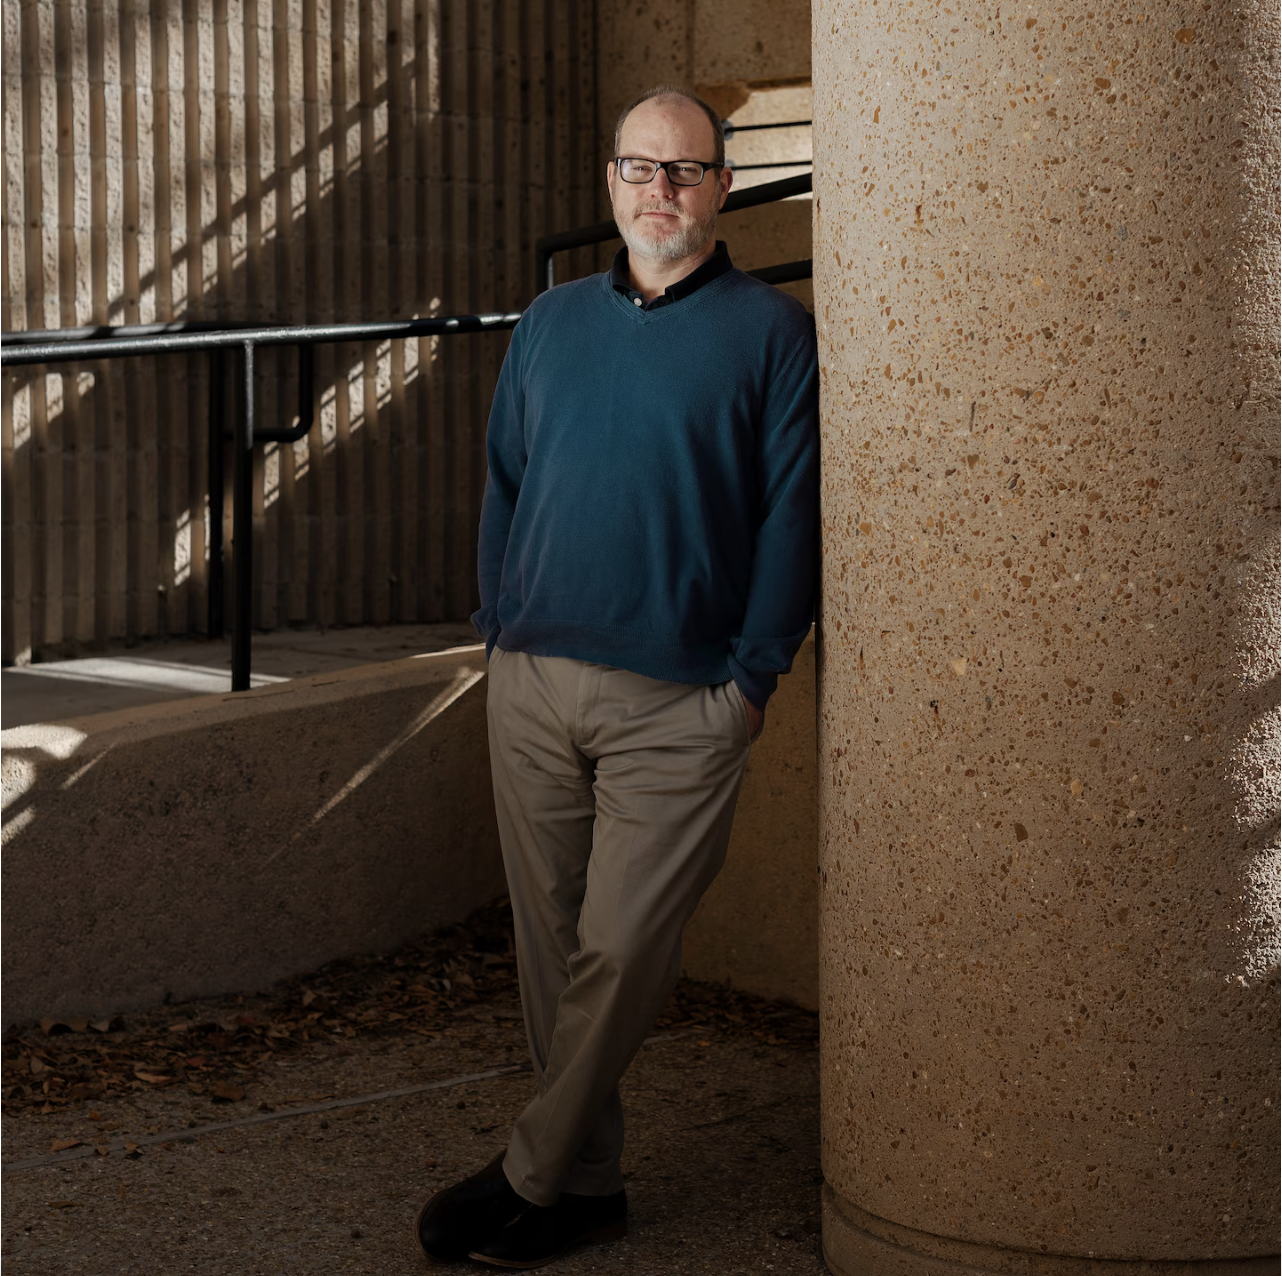 Stephen Monroe, associate professor in the Department of Writing and Rhetoric at the University of Mississippi. (Houston Cofield for The Washington Post)